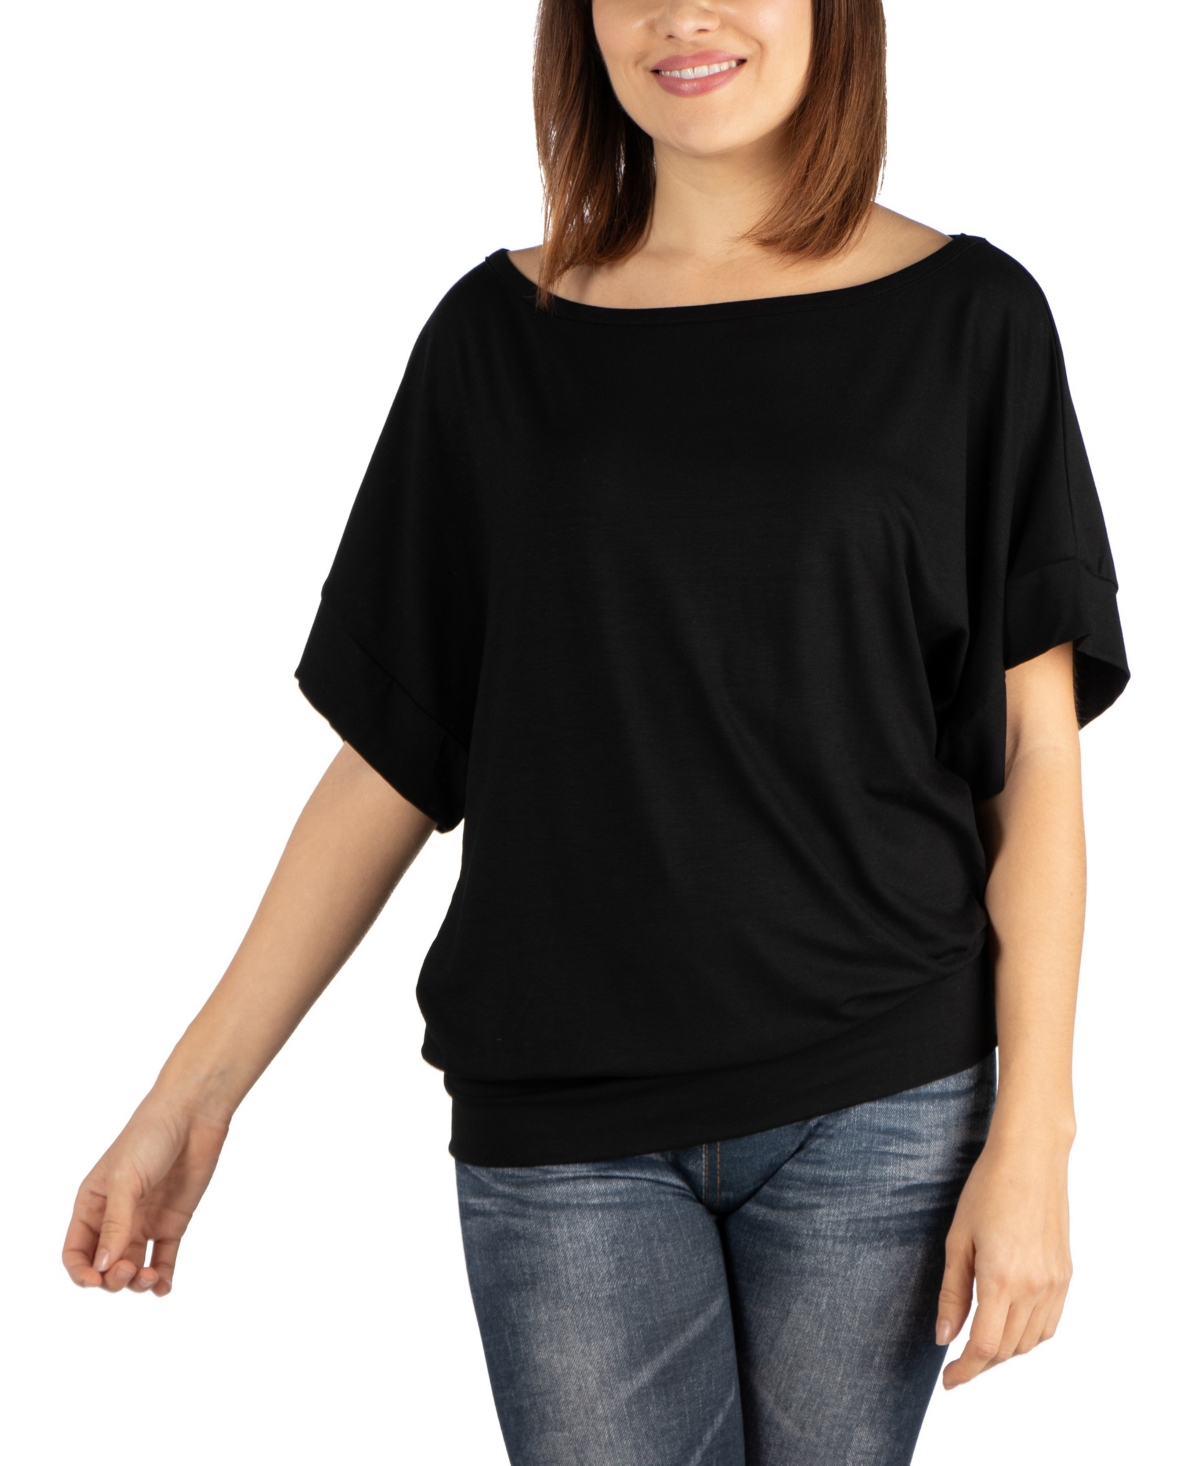 24SEVEN COMFORT APPAREL WOMEN'S LOOSE FIT DOLMAN TOP WITH WIDE SLEEVES